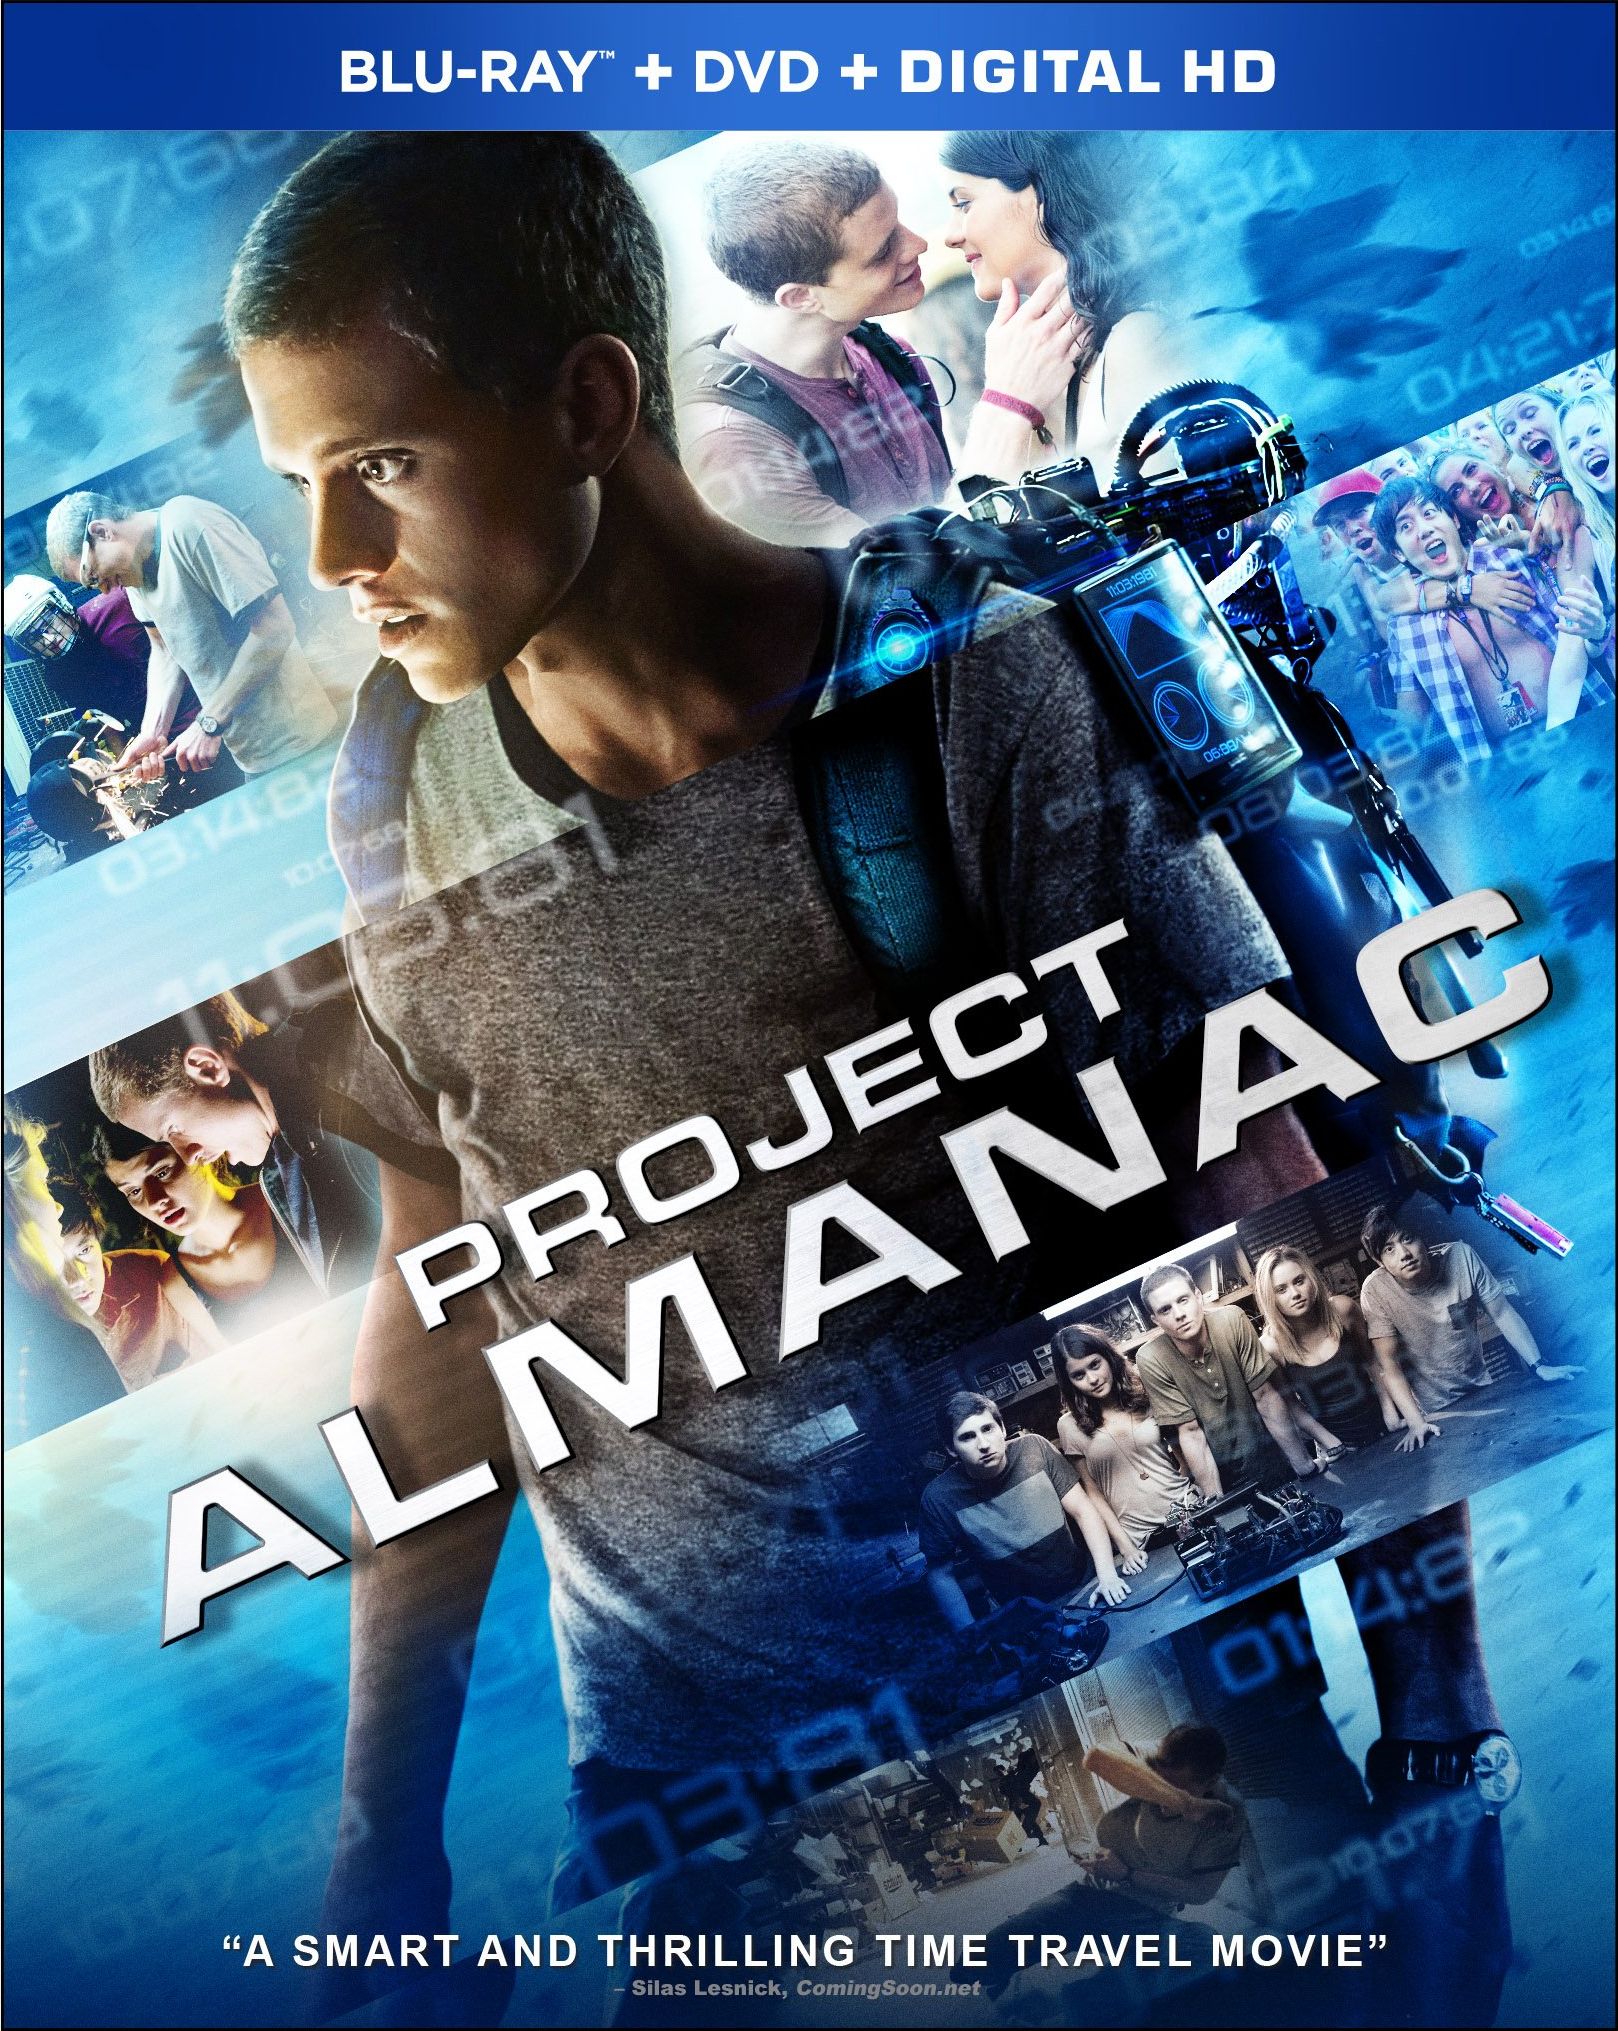 Project Almanac Blu-ray Review